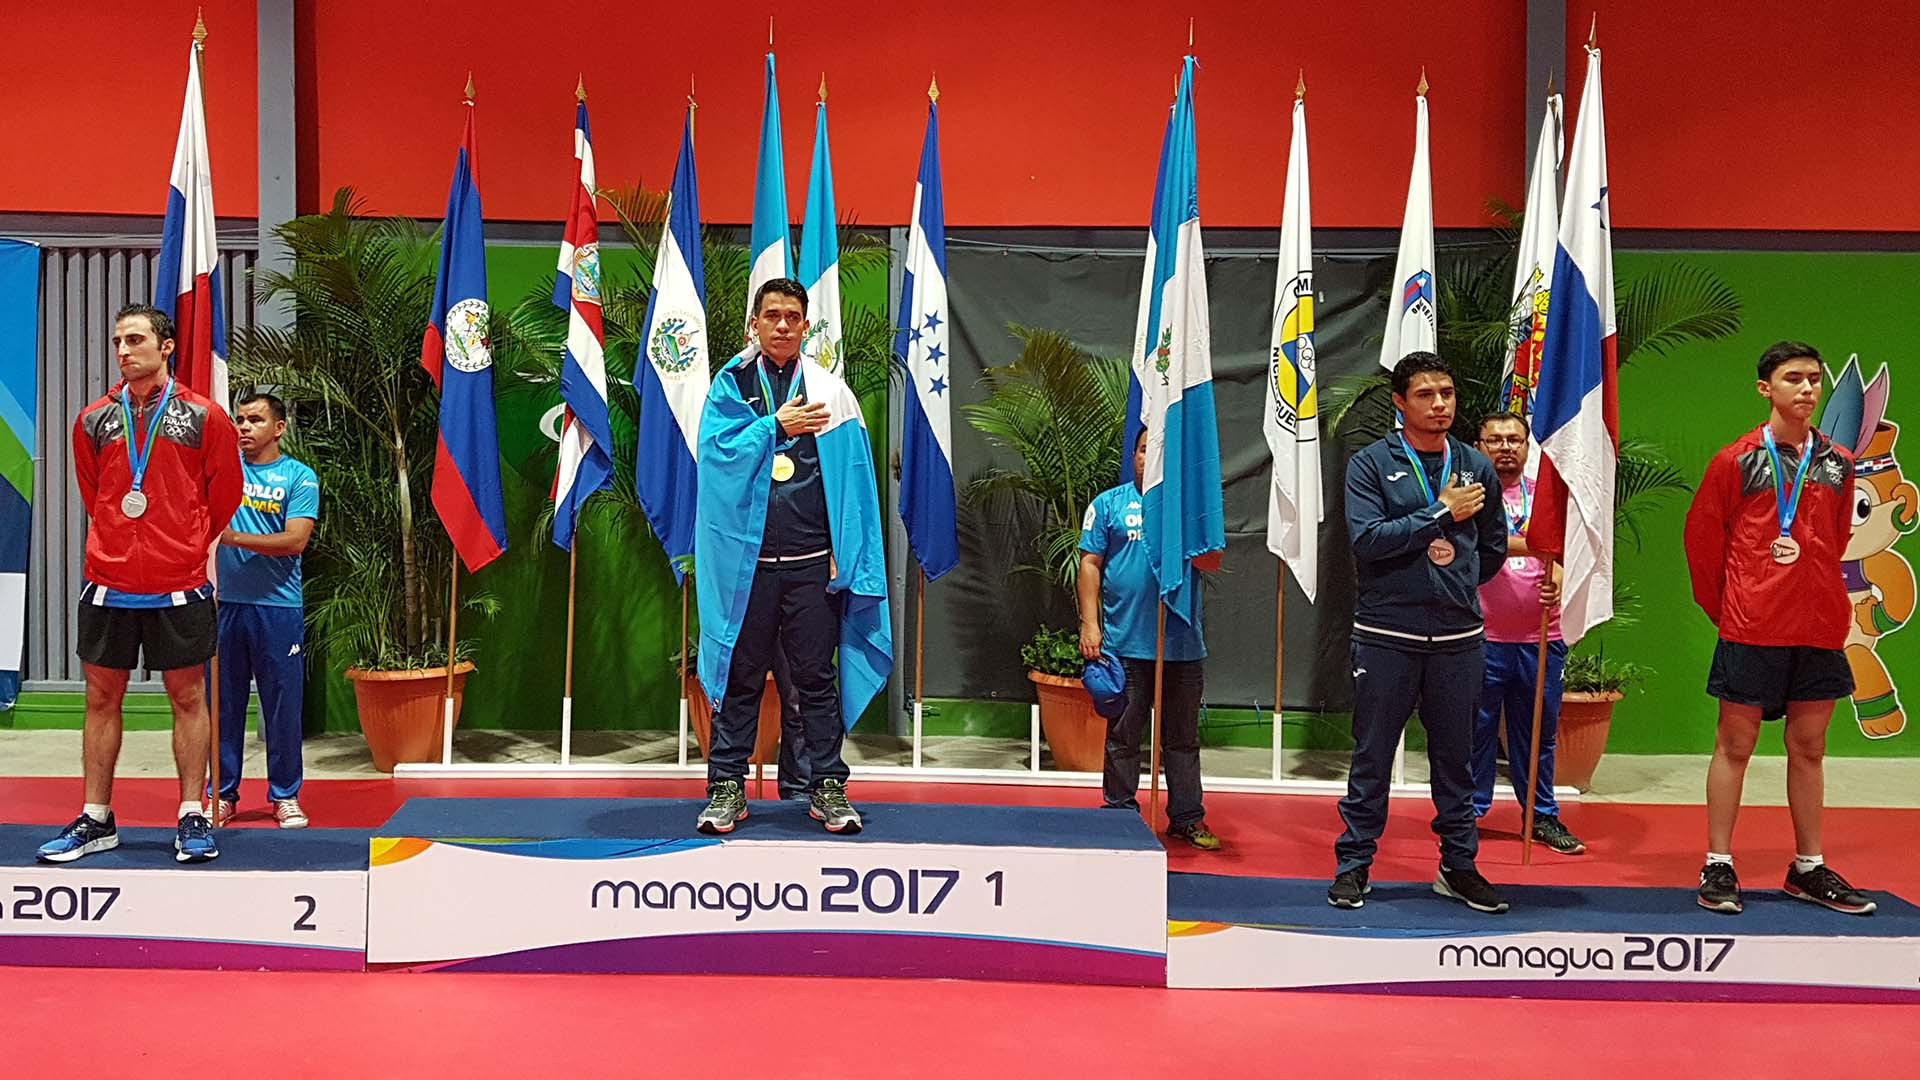 Managua has already played host to the Central American Games earlier this month ©ITTF